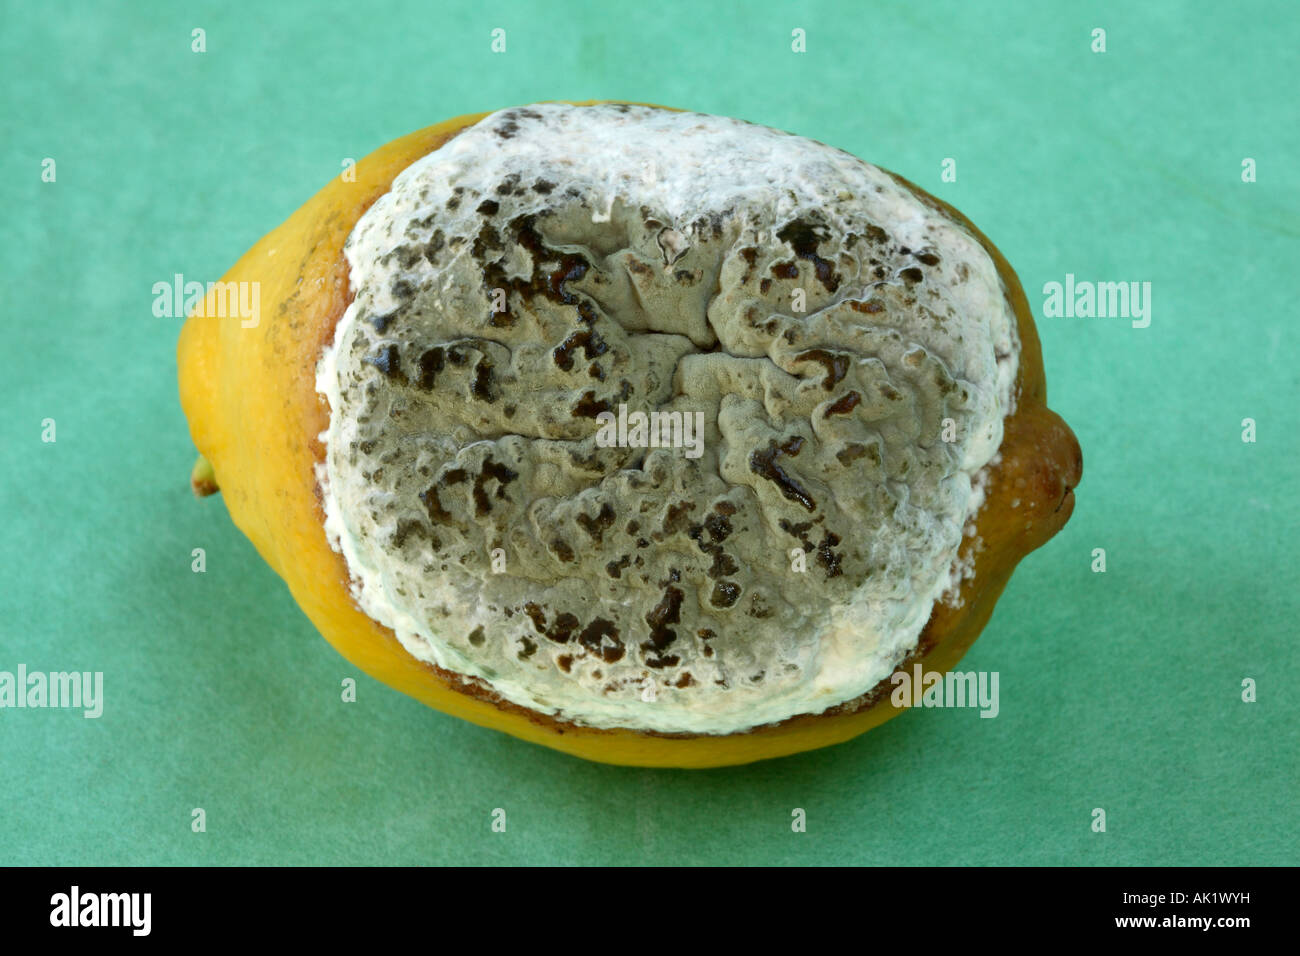 Close up of a large green and white mold Penicillium digitatum totally covering one side of a yellow lemon. Stock Photo